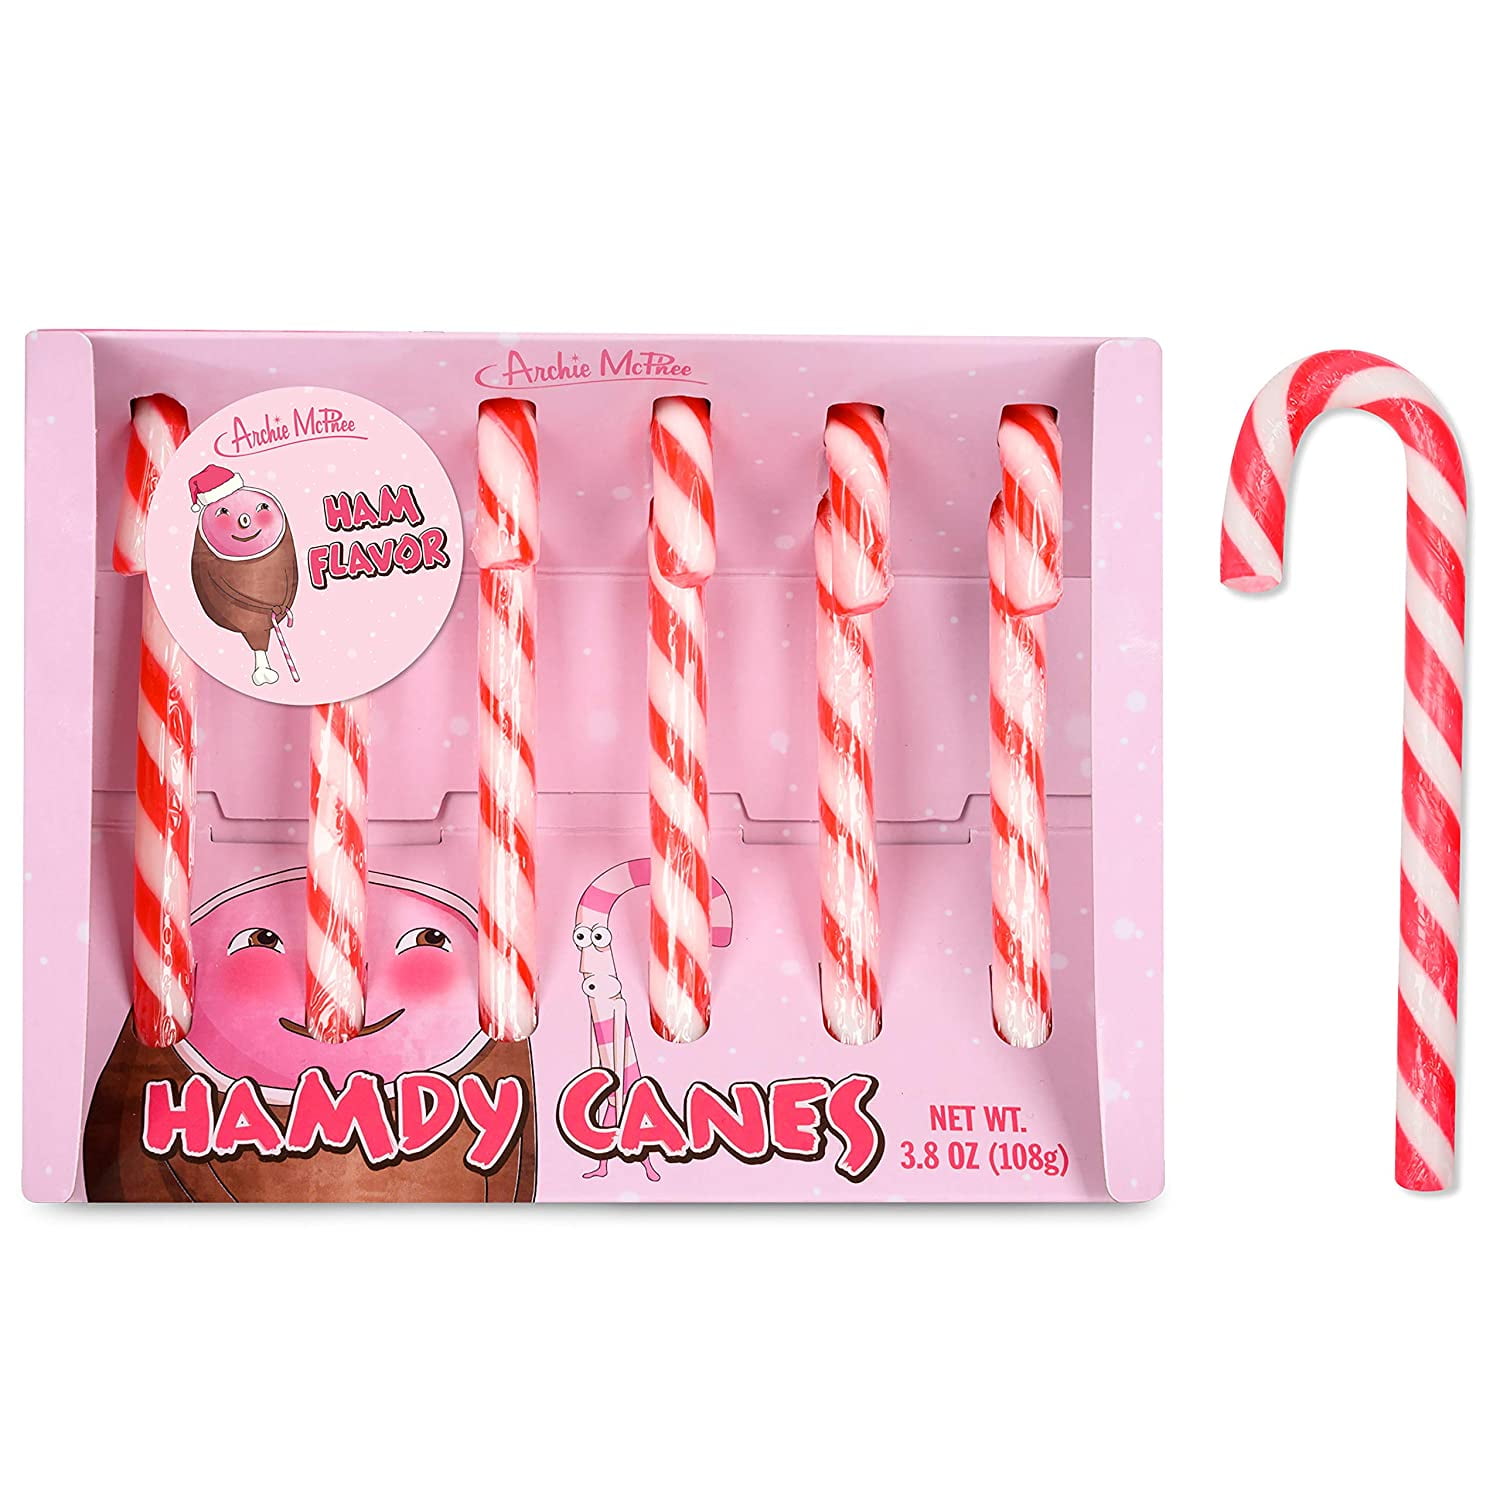 Pink And White Hamdy Canes T Box Of 6 Funny Ham Flavored Flavored